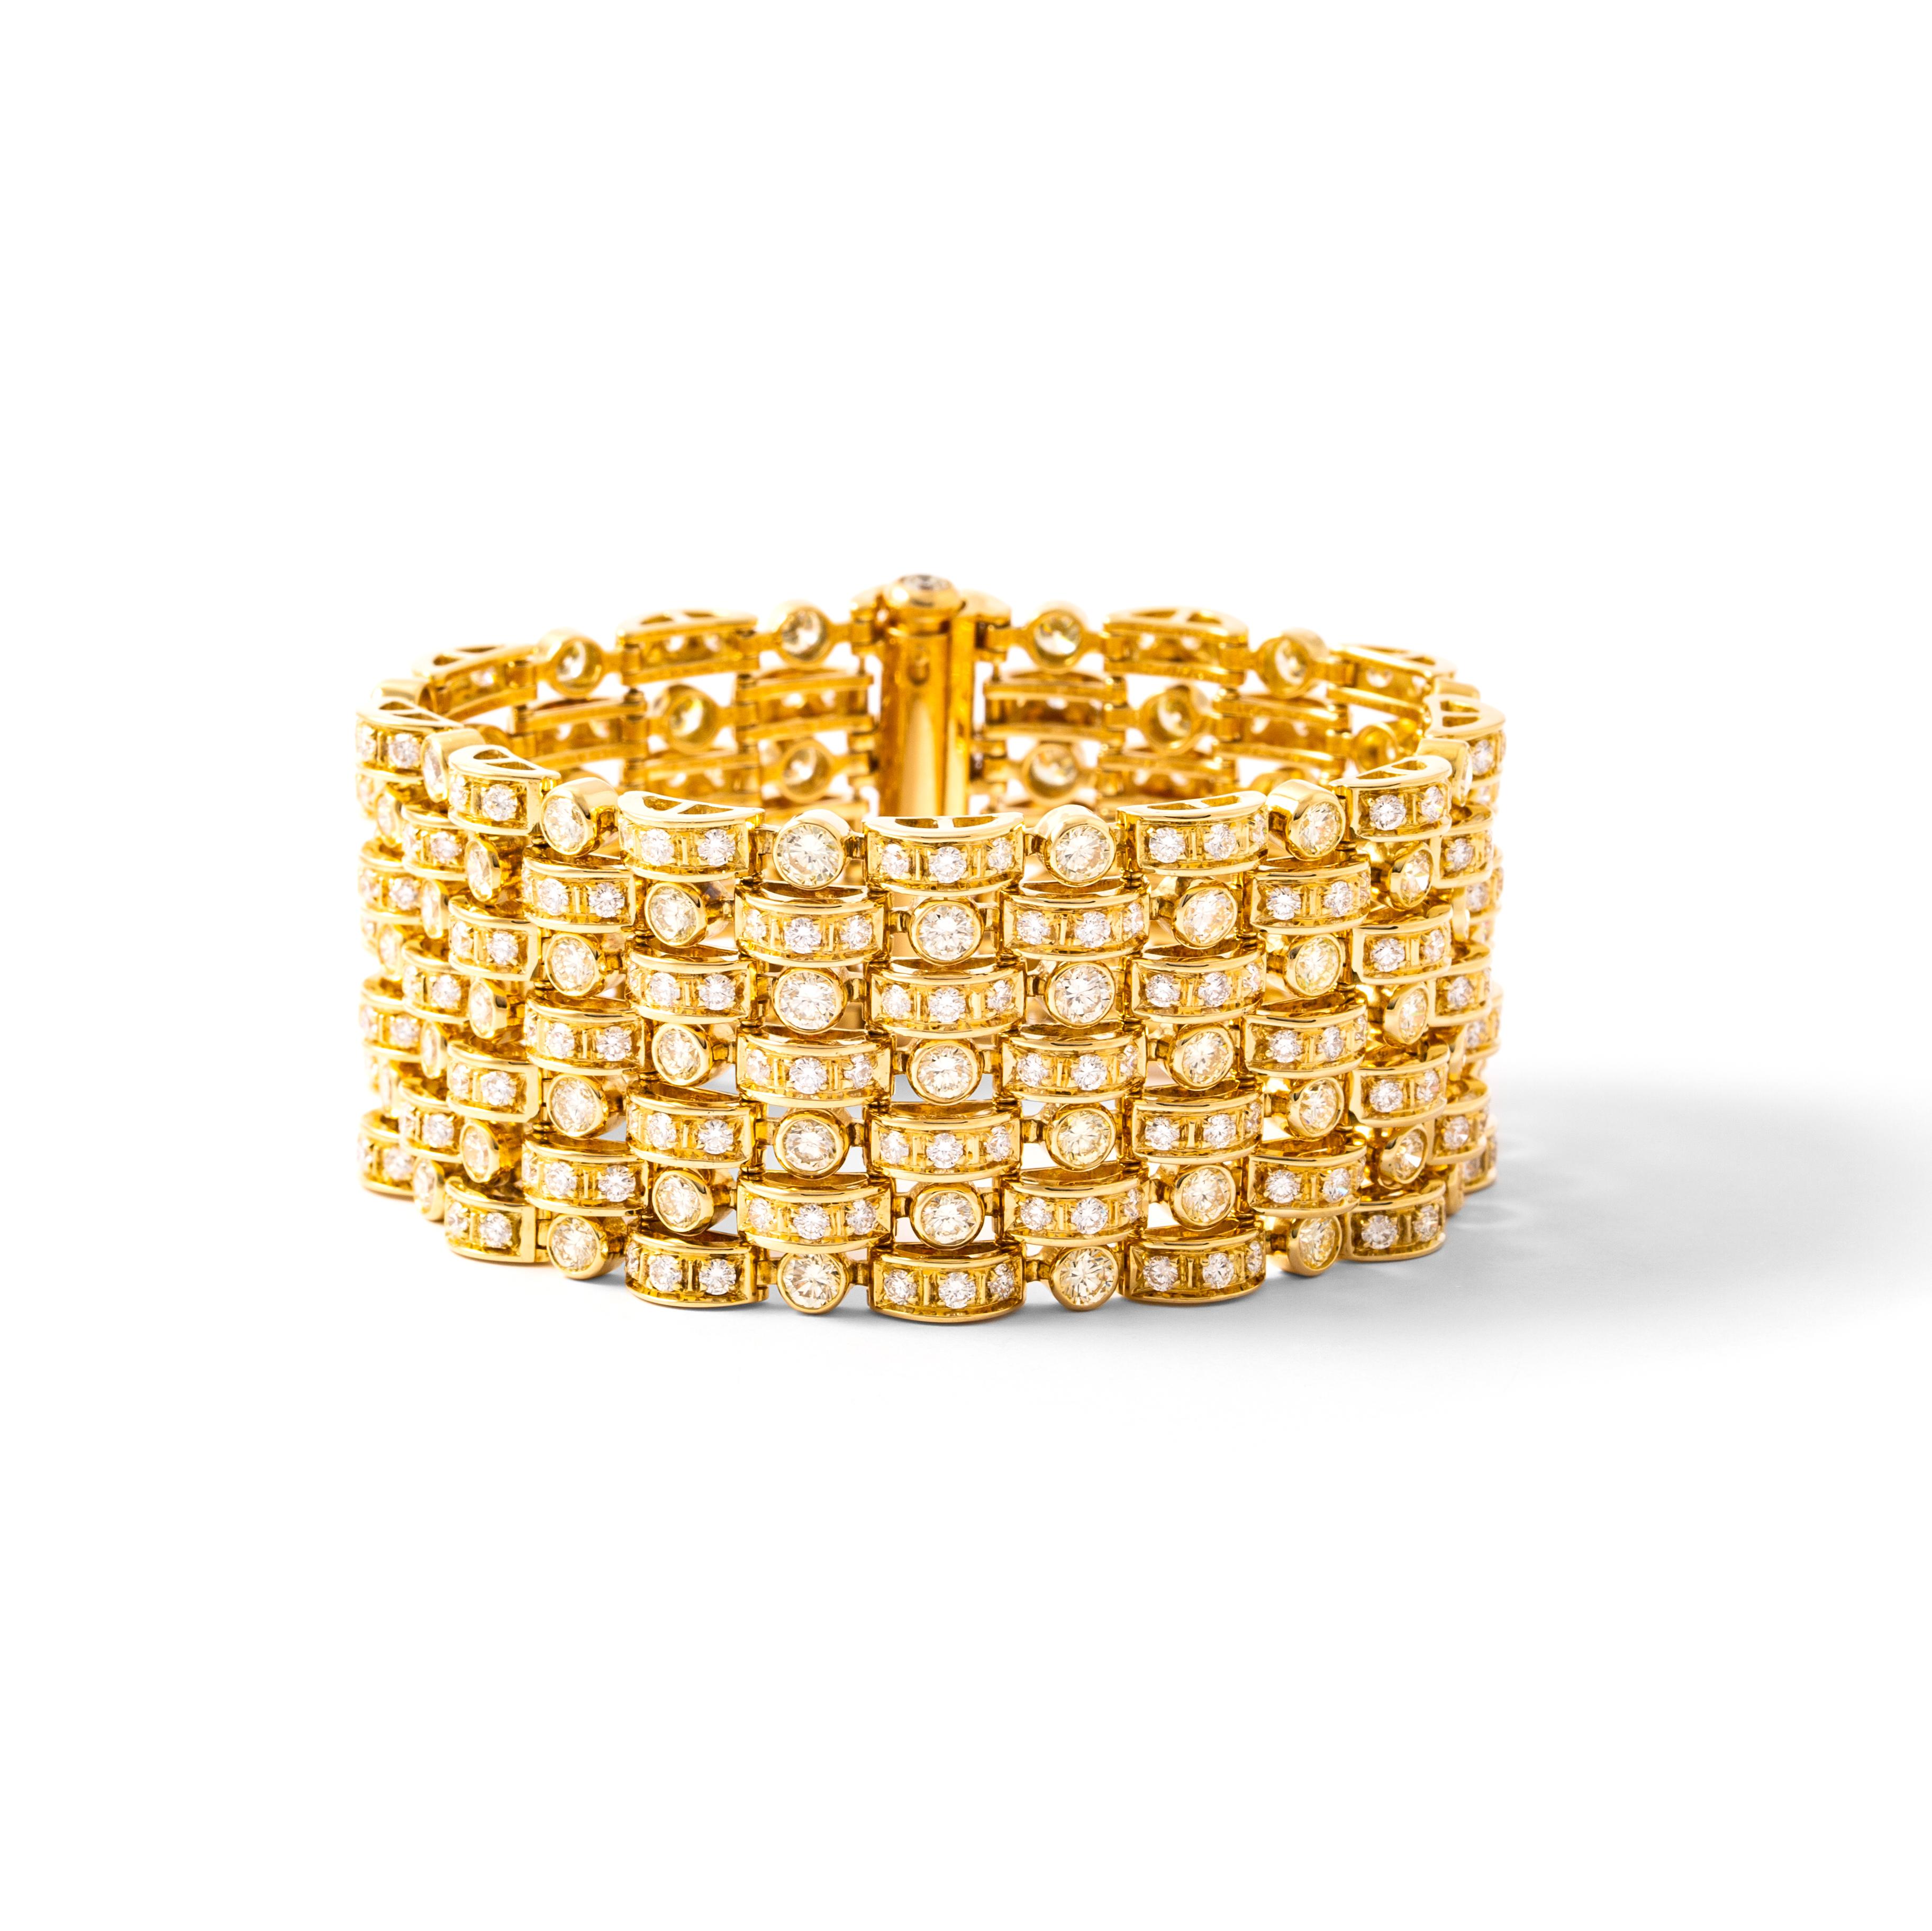 Wide bracelet in 18kt yellow gold set with 338 diamonds 22.60 ct